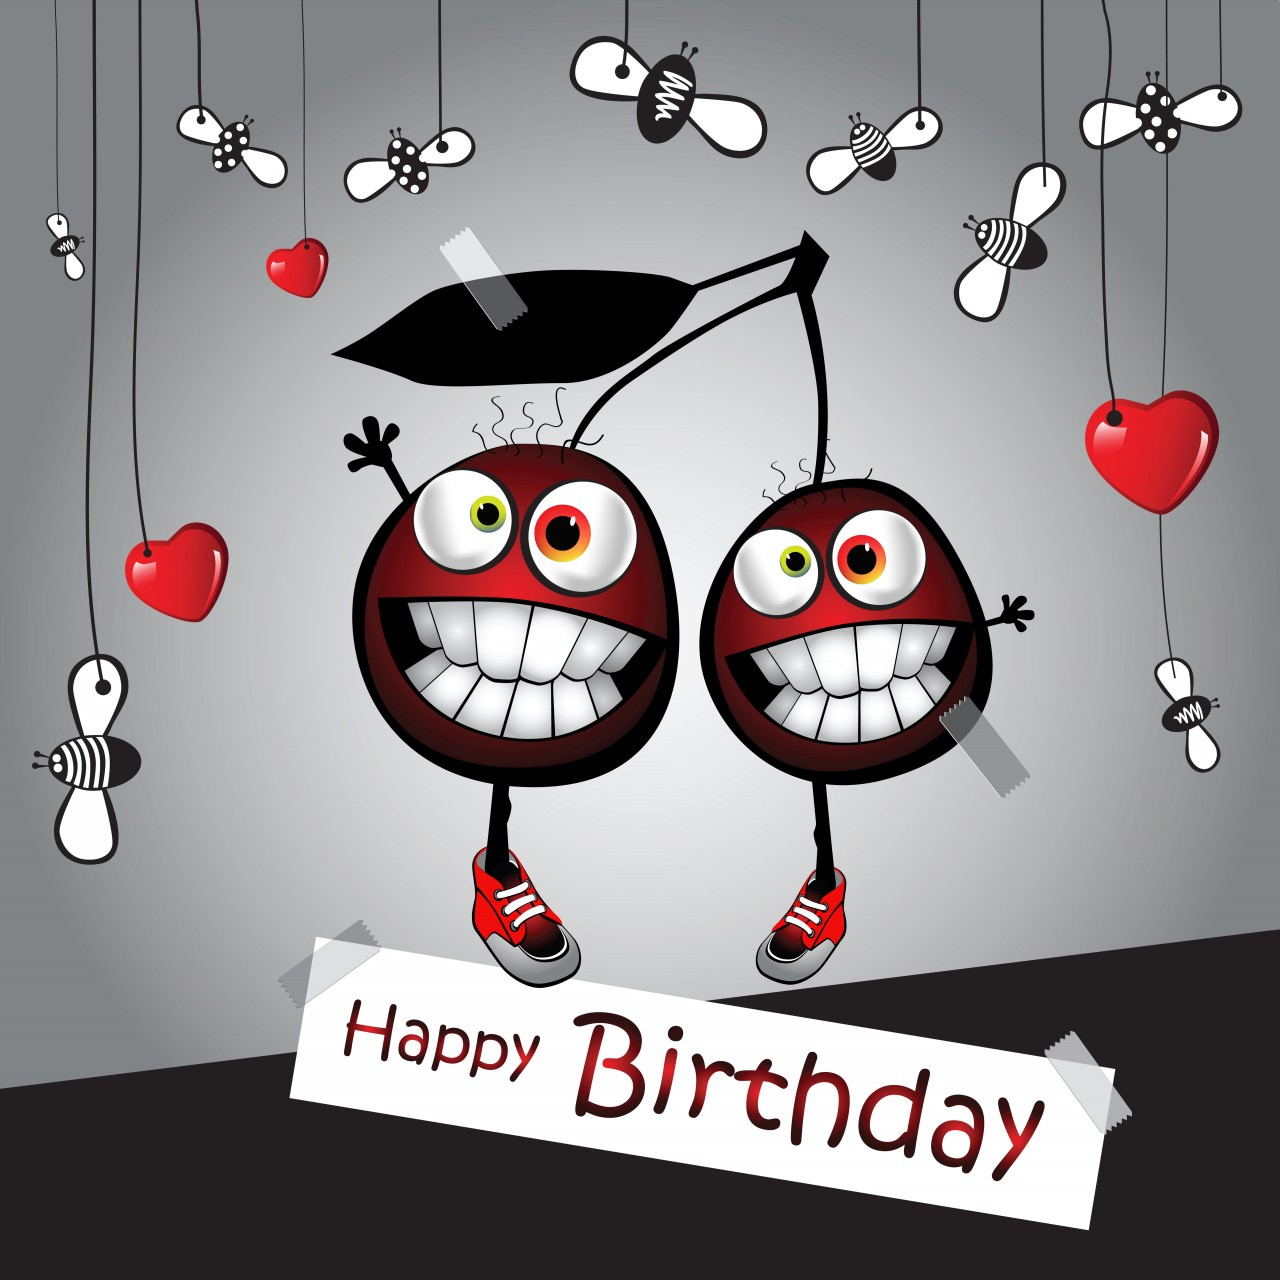 Funny Happy Birthday Cards
 50 Happy Birthday For Him With Quotes iLove Messages